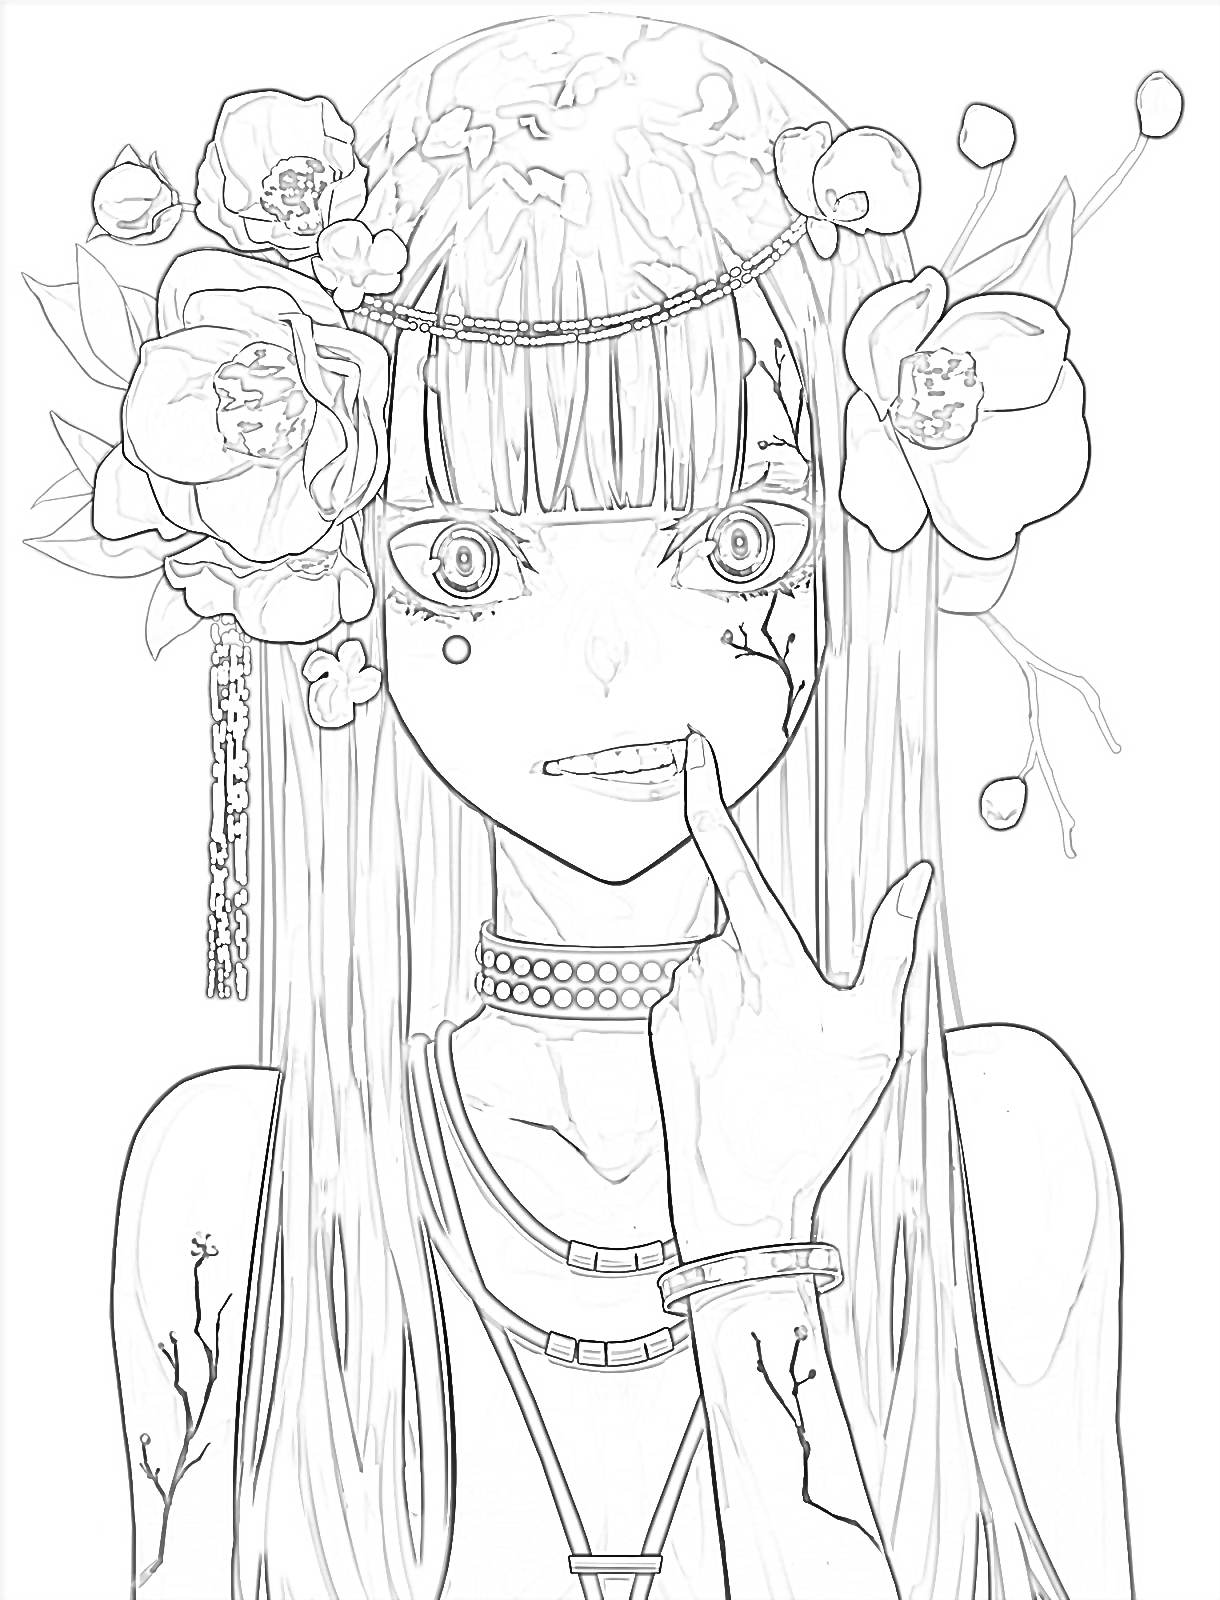 Anime Coloring Page Images - Free Download on Freepik